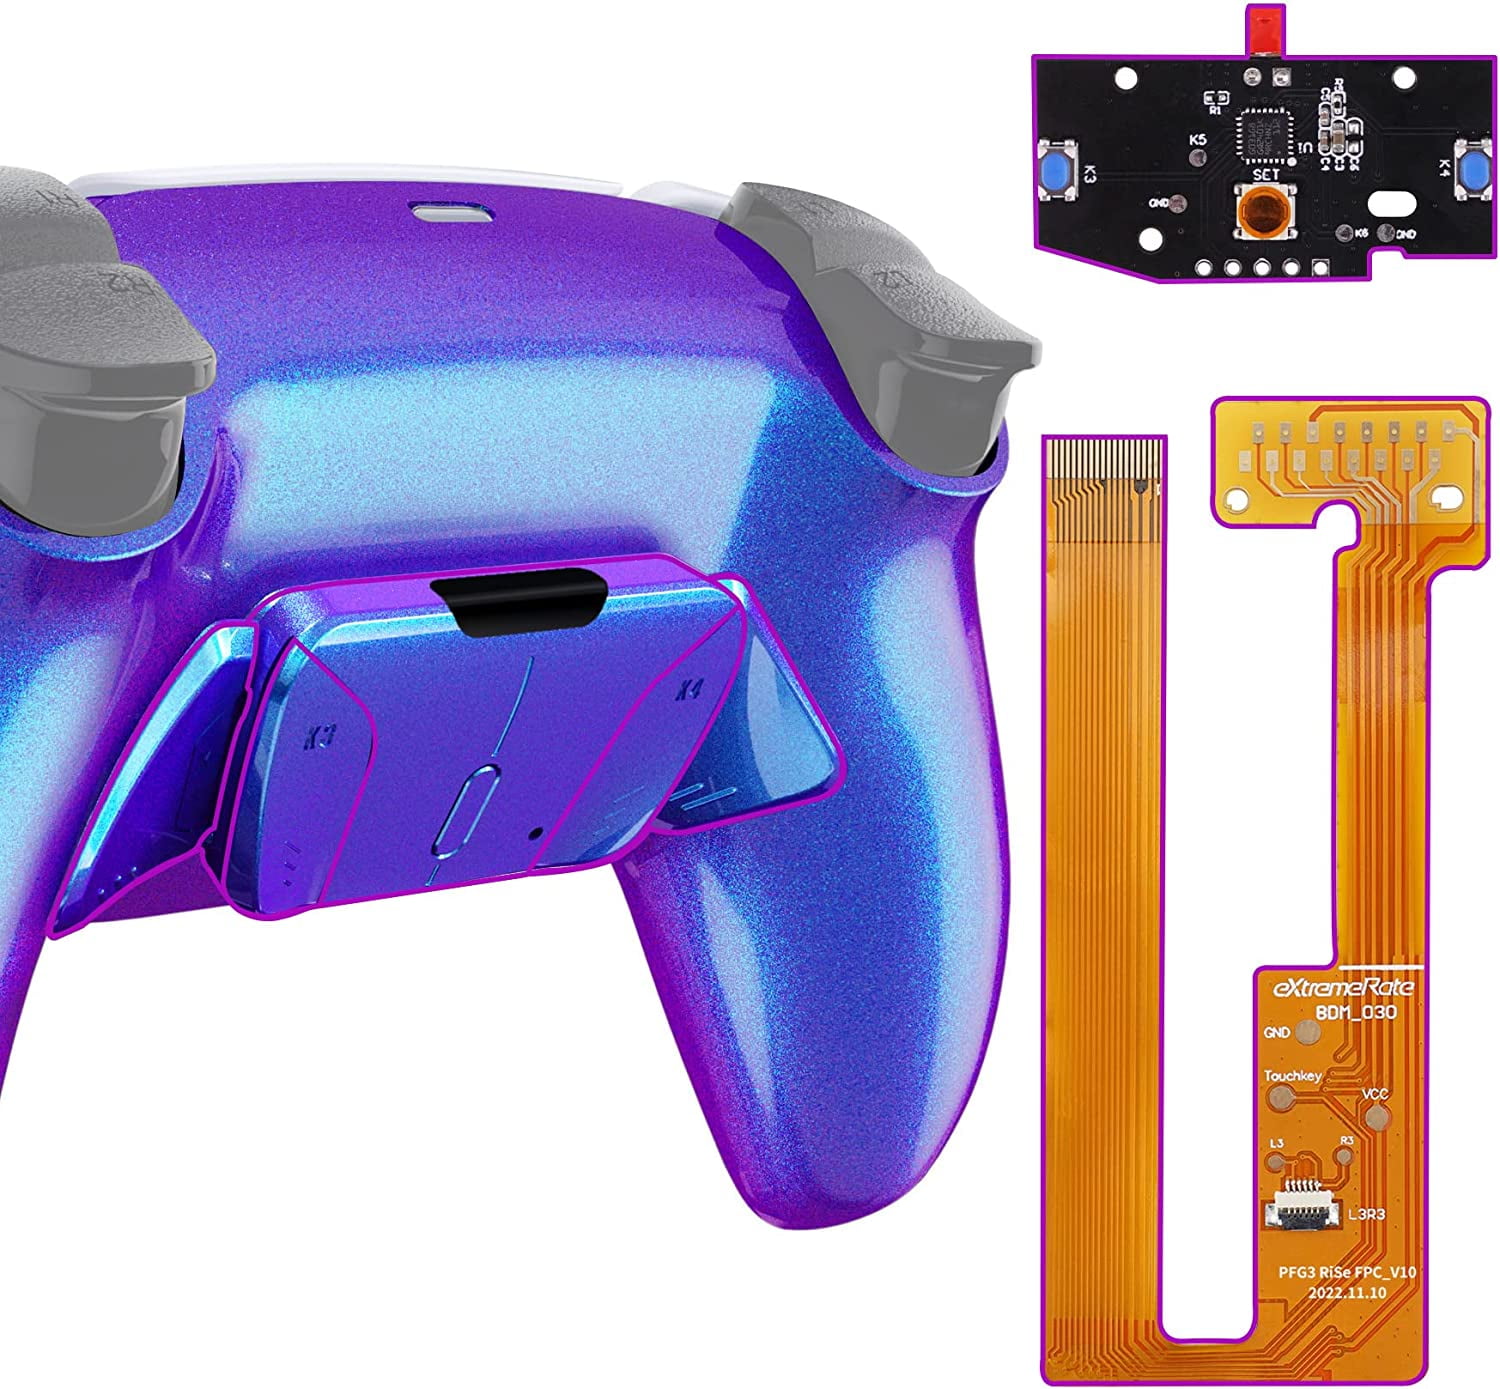 eXtremeRate Chameleon Purple Blue Programable RISE4 Remap Kit for PS5  Controller BDM-030, Upgrade Board  Redesigned Back Shell  Back Buttons  for PS5 Controller Controller NOT Included